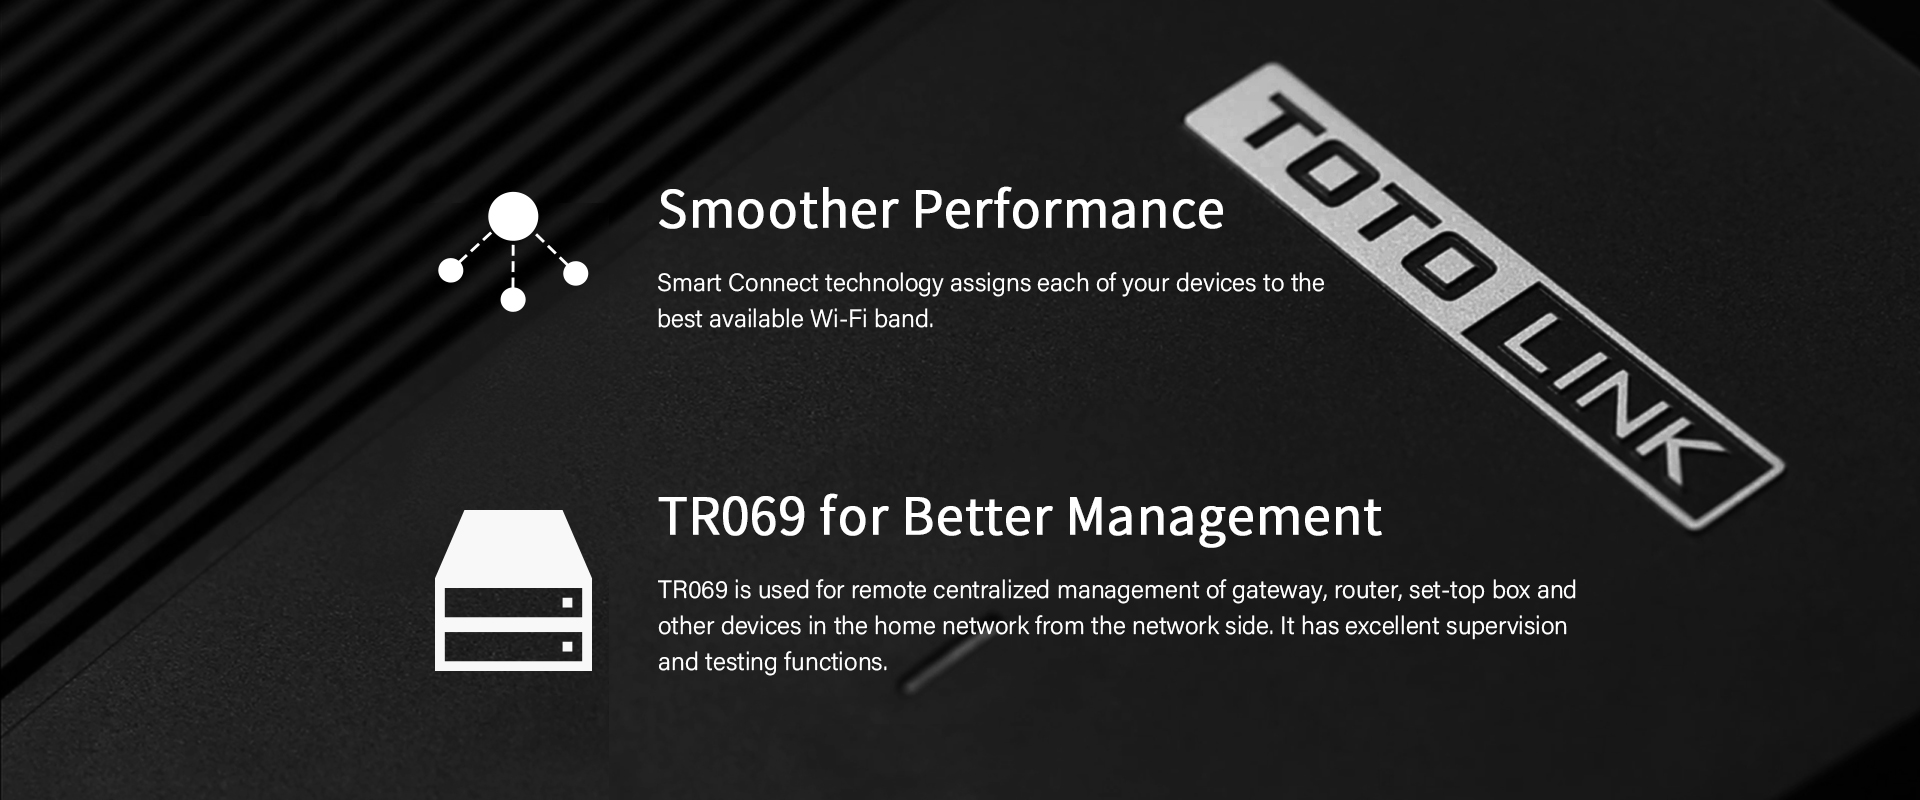 smoother performance 